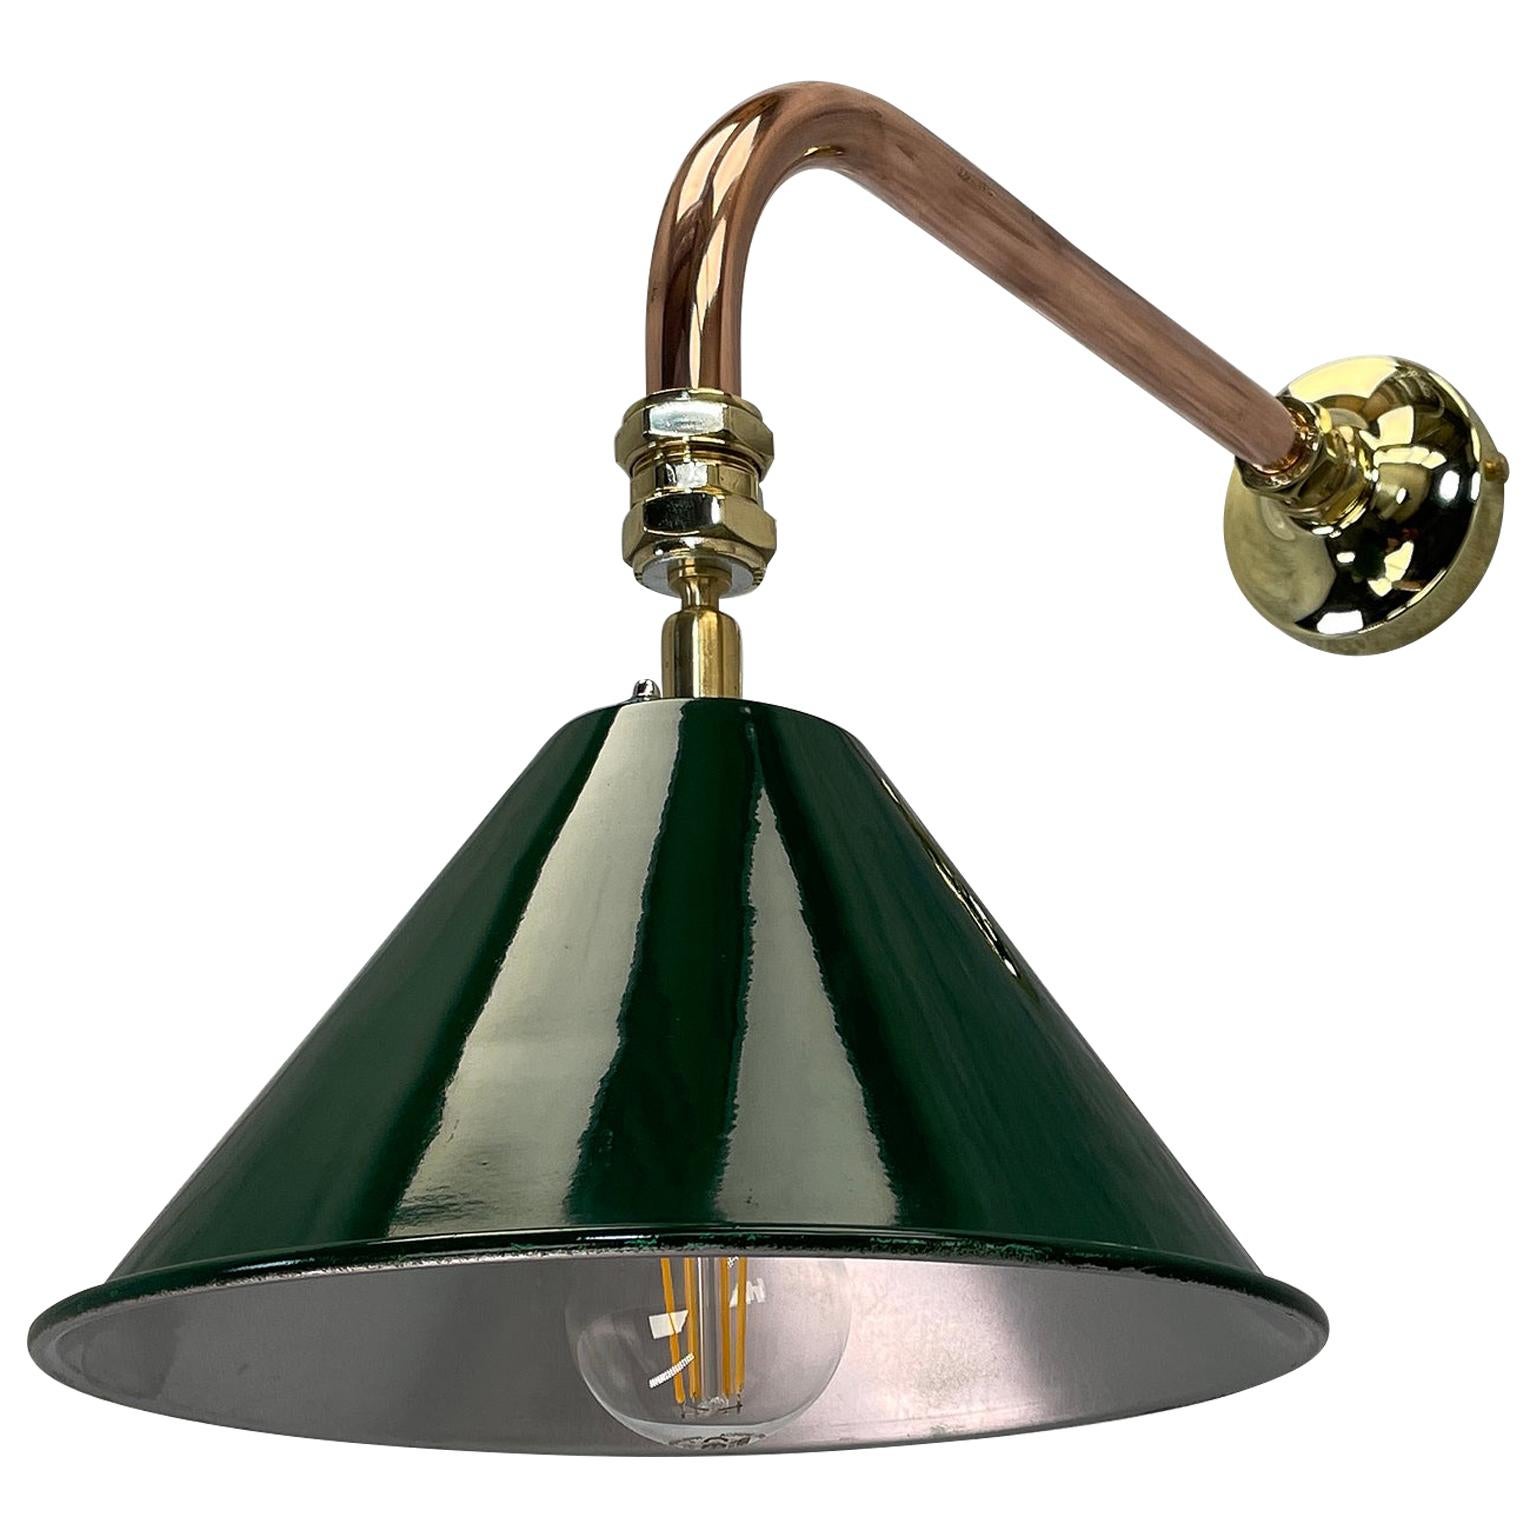 1980's Copper & Brass Cantilever Lamp Green British Army Lamp Shade